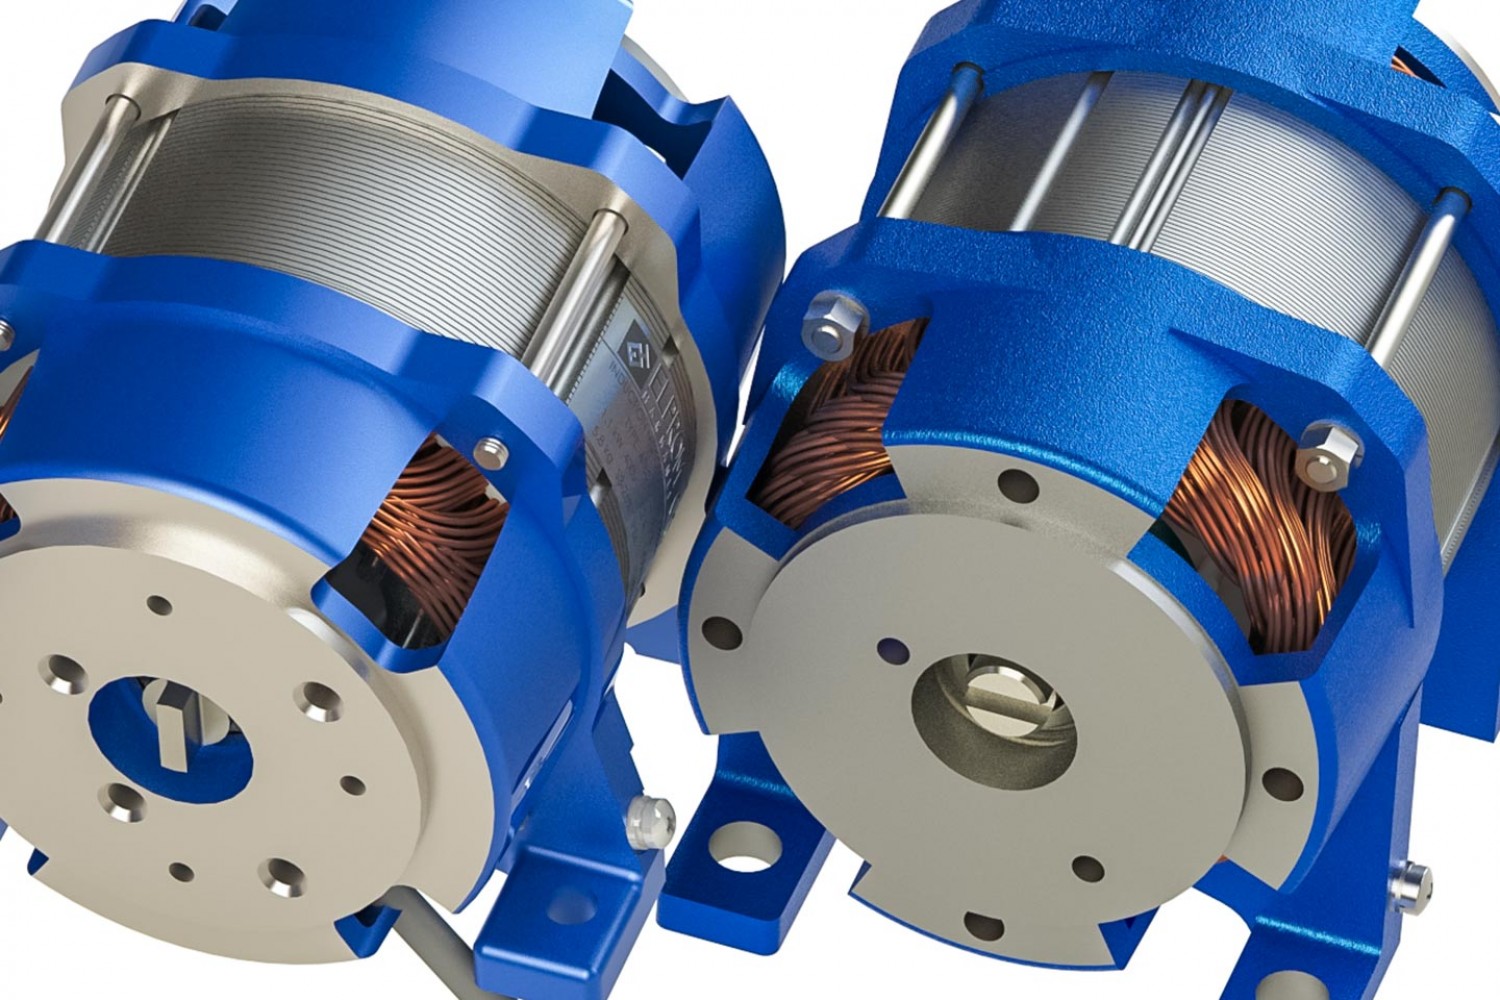 Submersible motors for hydraulic pumps